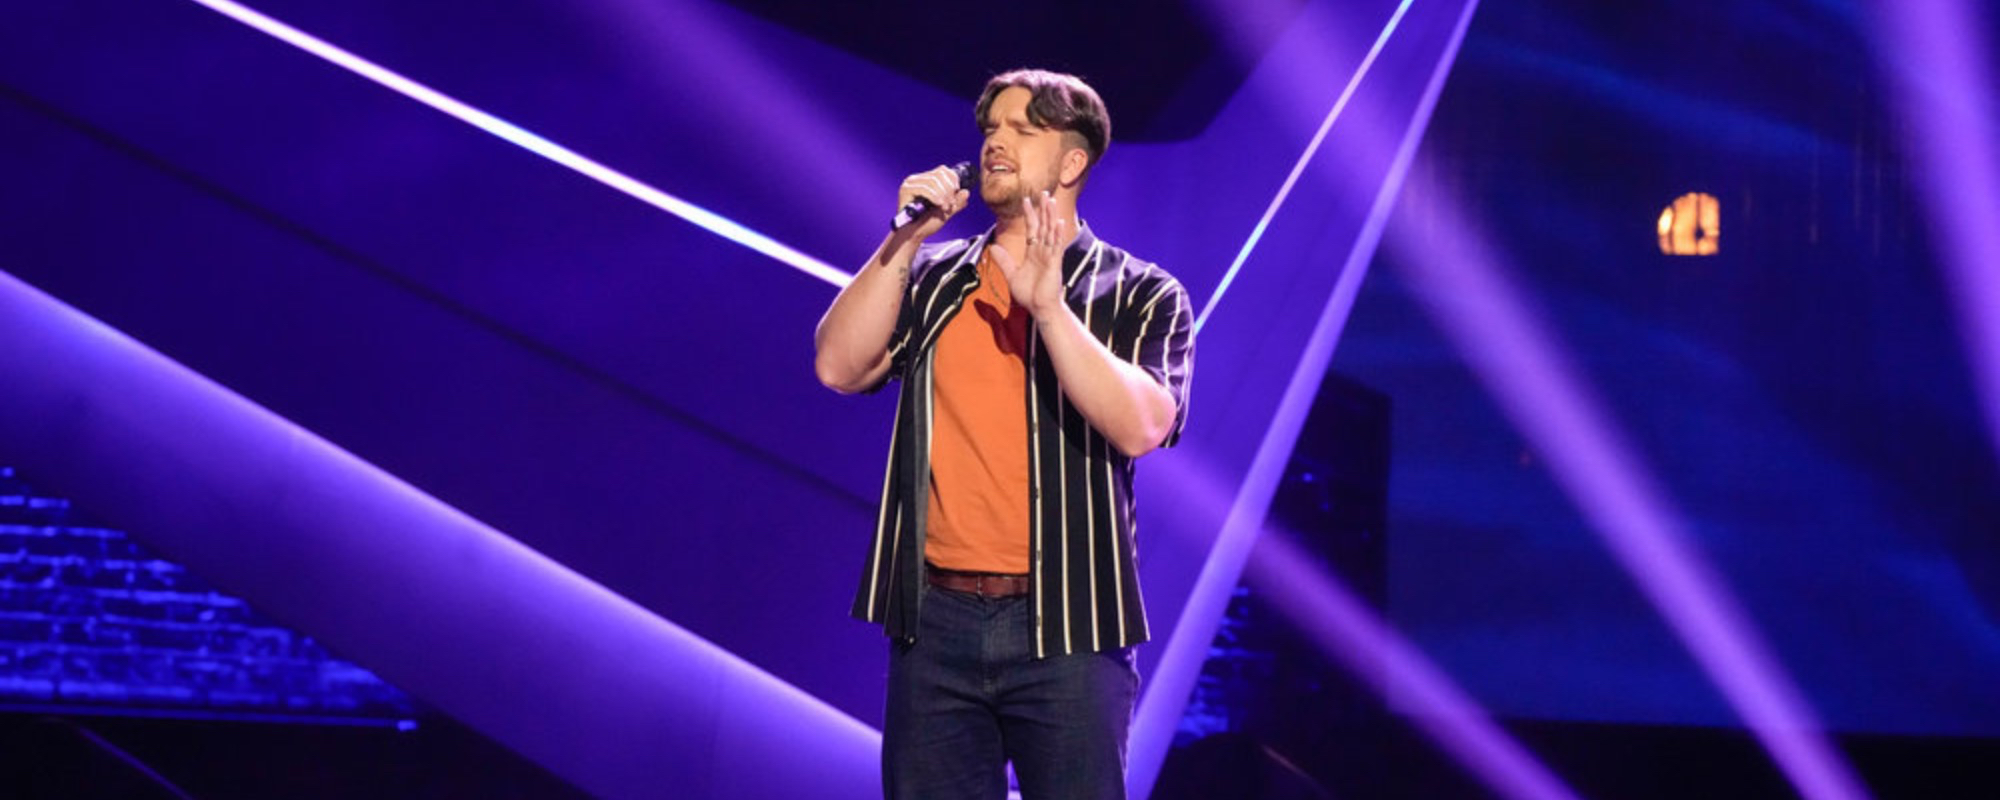 JB Somers Wows With Joni Mitchell’s “A Case of You” on ‘The Voice’